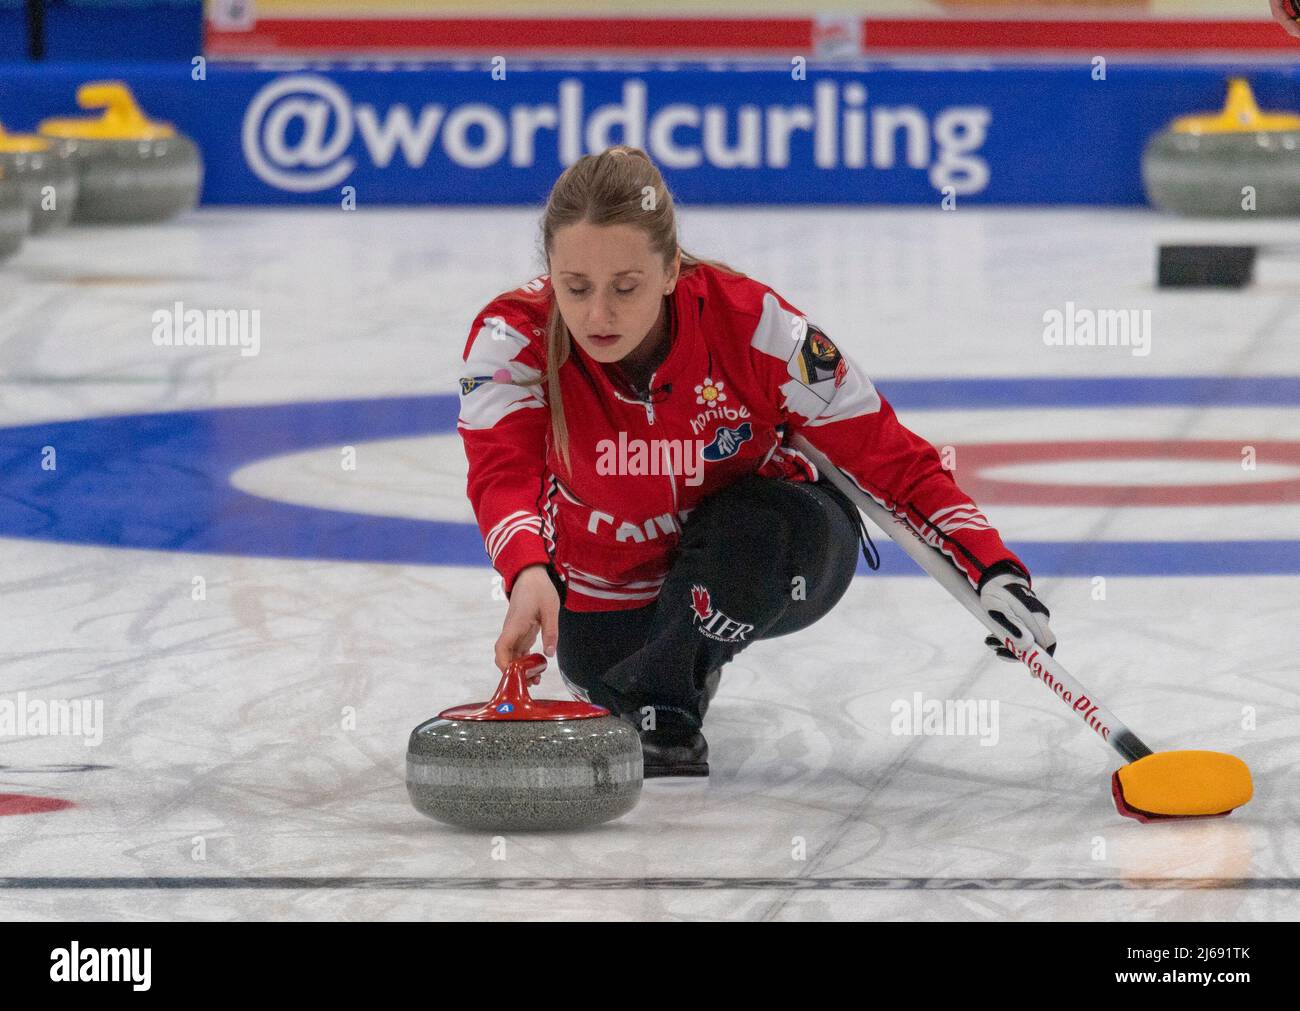 Geneva Switzerland, 29th April 2022 Jocelyn PETERMAN of Canada is in action during the World Mixed Doubles Curling Championship 2022